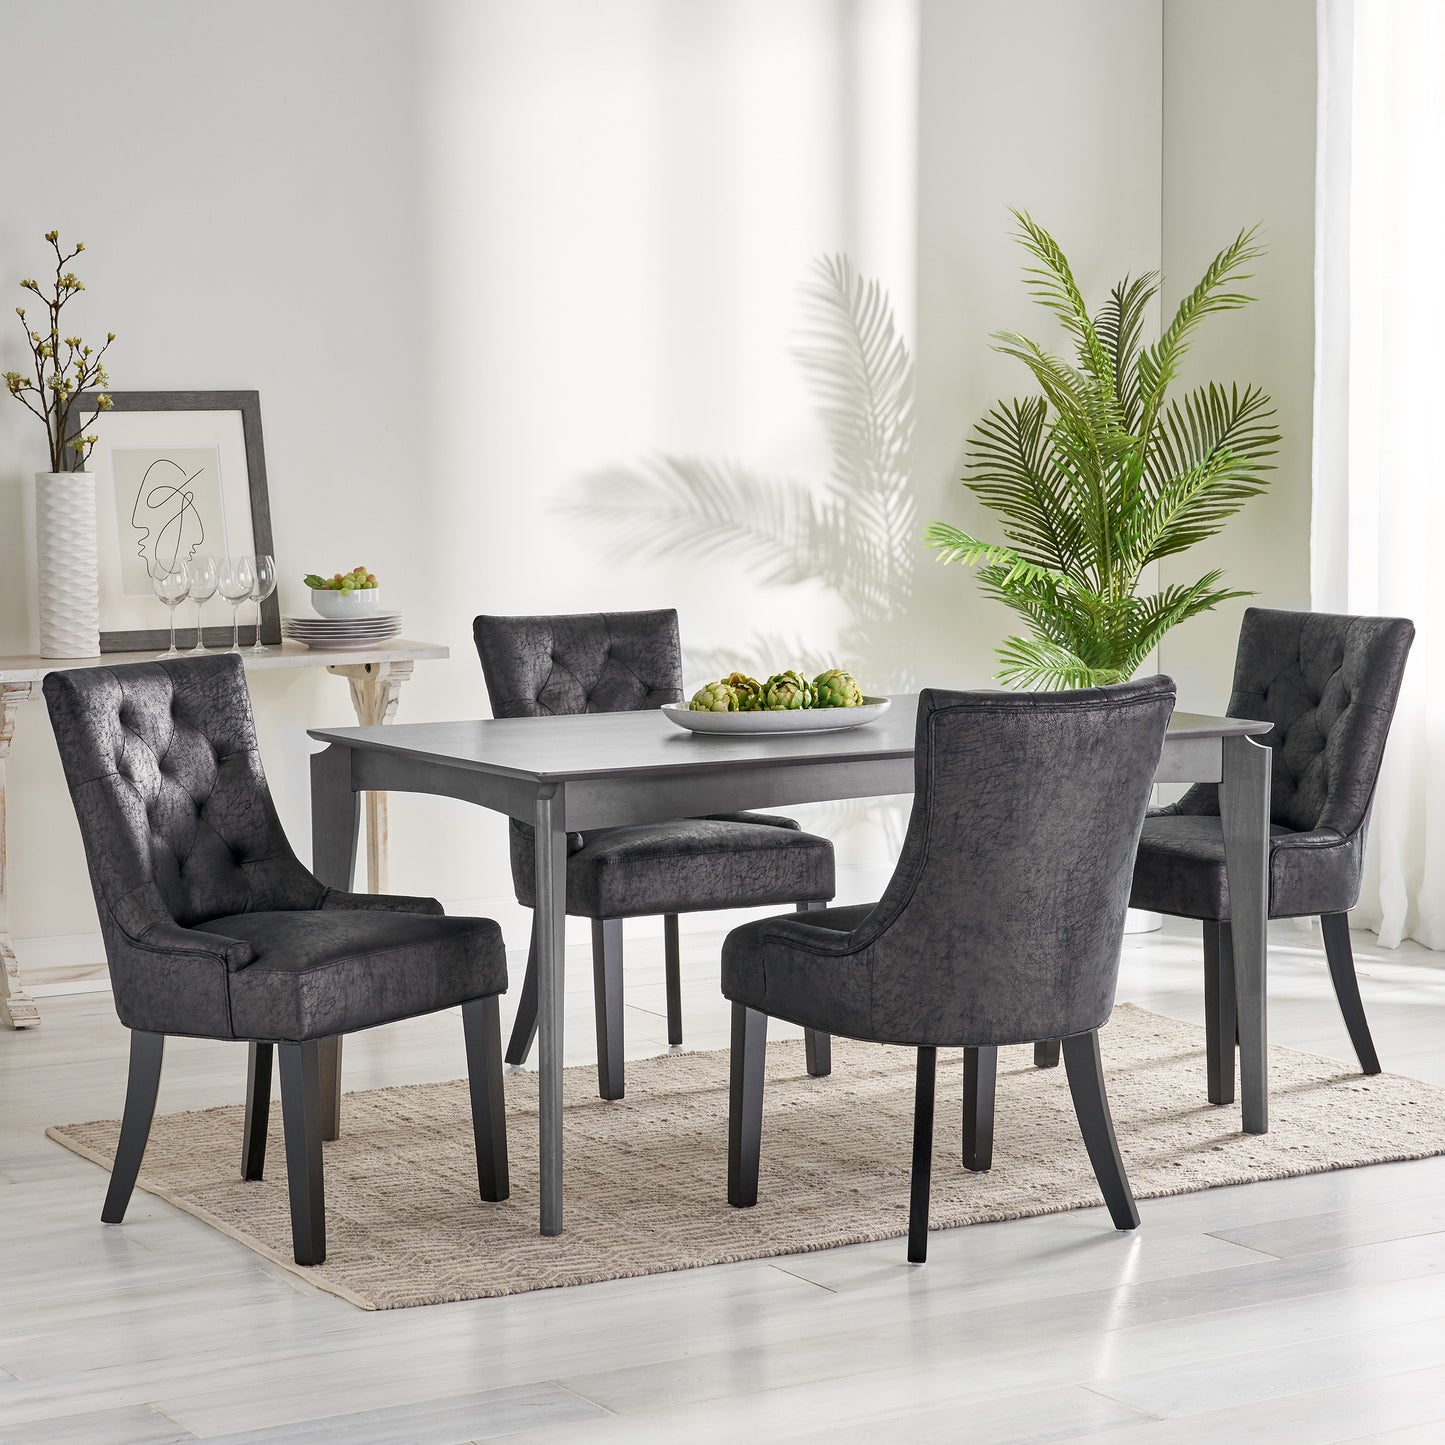 Stacy Hourglass Microfiber Dining Chairs (Set of 4)